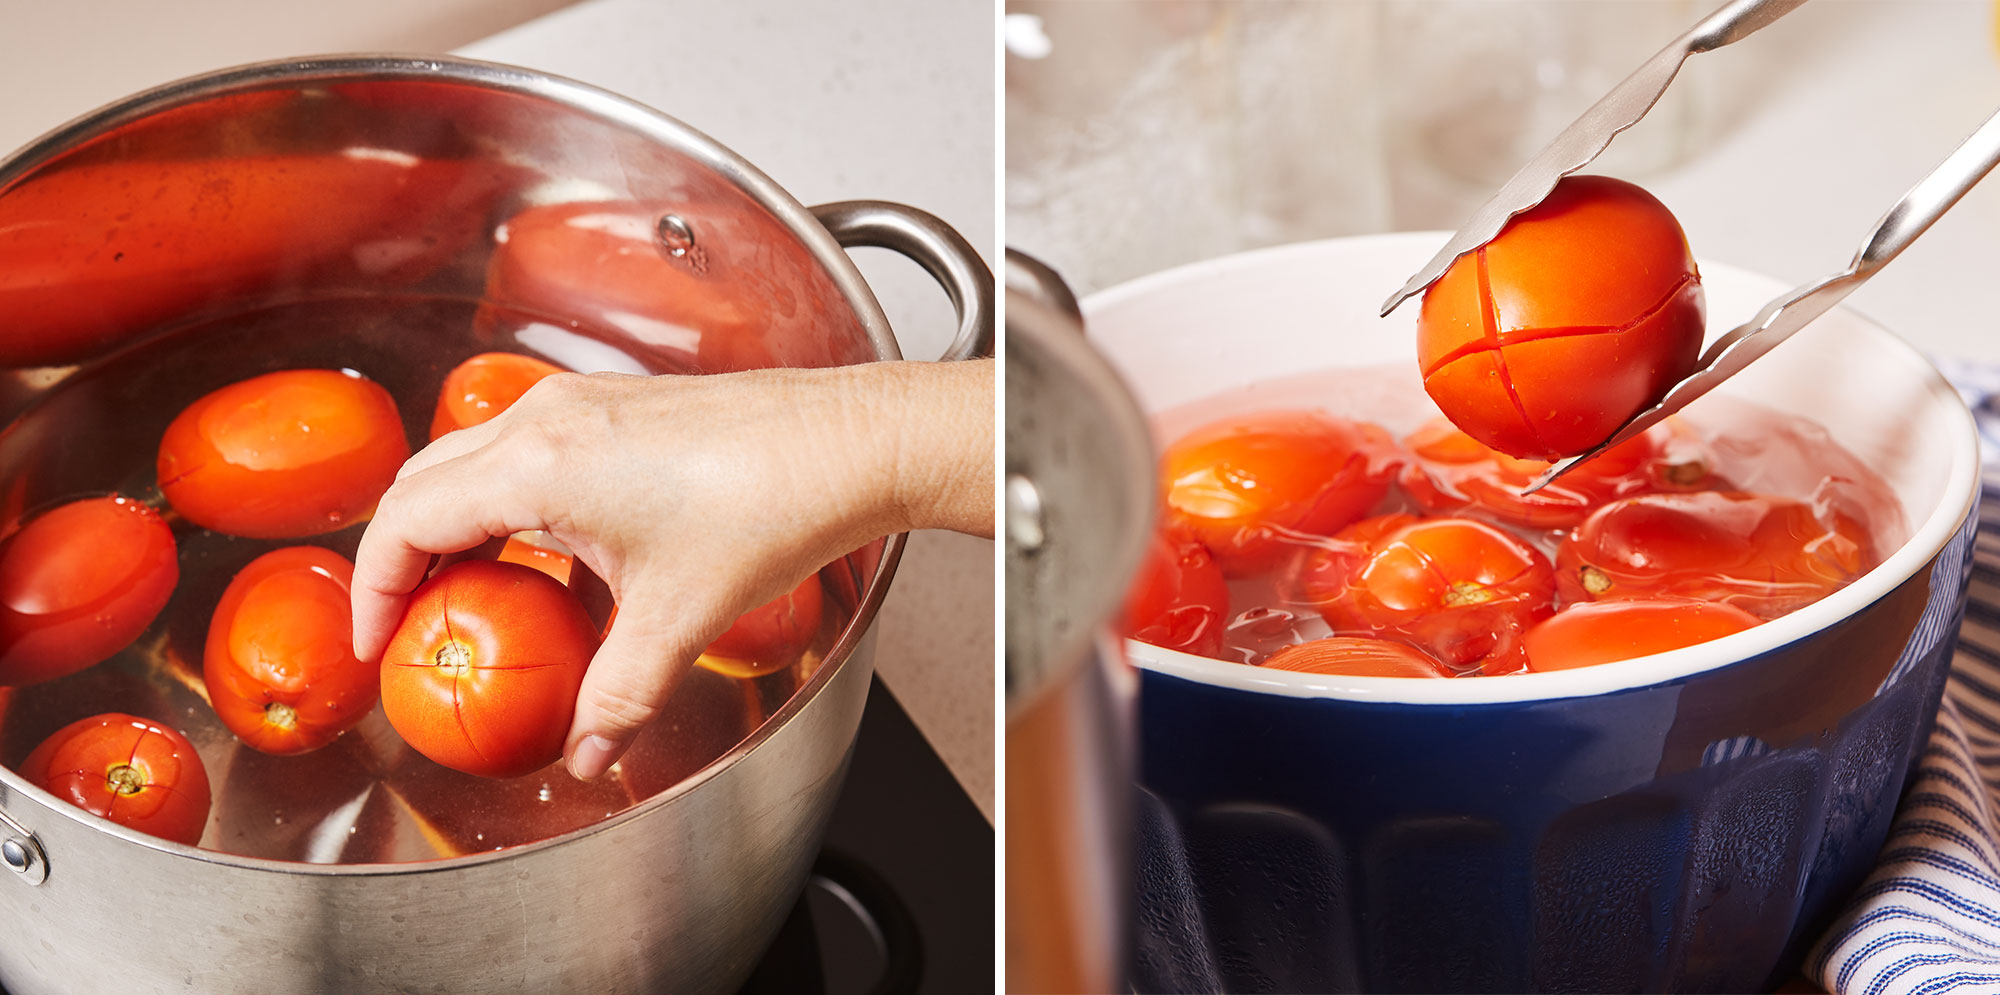 Image left: Adding tomatoes to a pot of water. Image right: Adding tomatoes to a bowl of ice water.